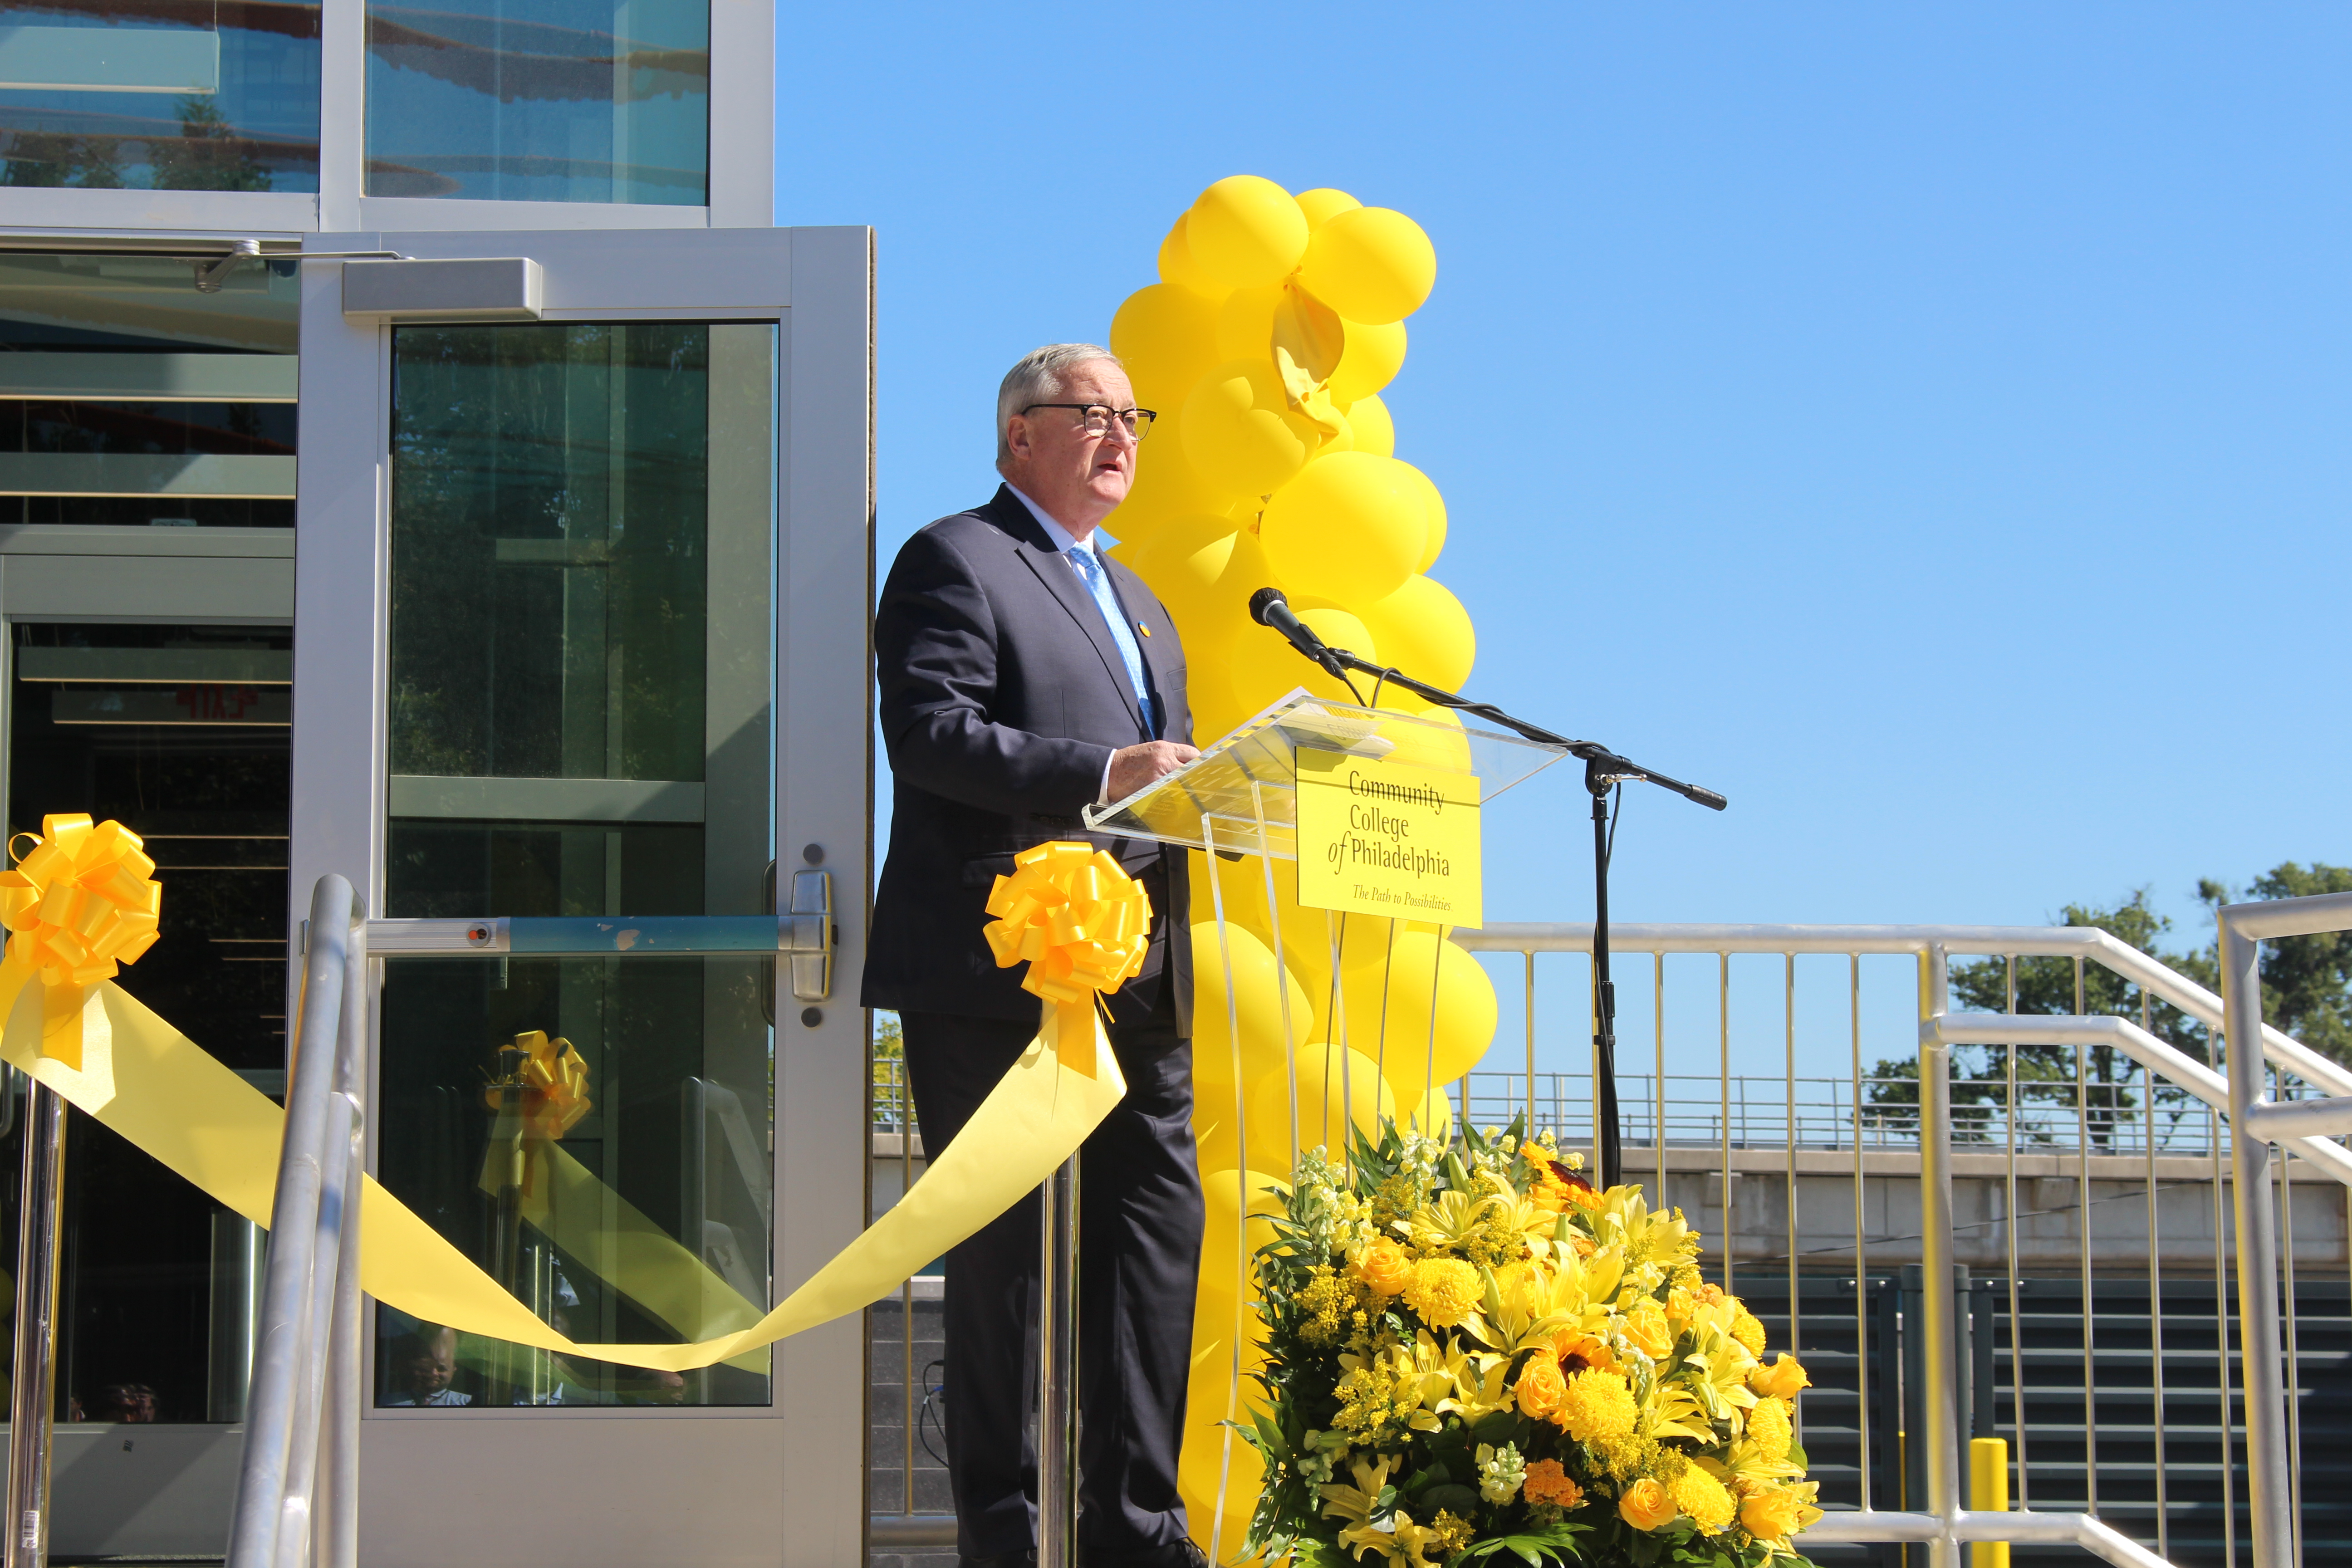 CCP credits Mayor Kenney as one of its "biggest cheerleaders" during the process of opening the CATC. Photo: Jensen Toussaint/AL DÍA News. 